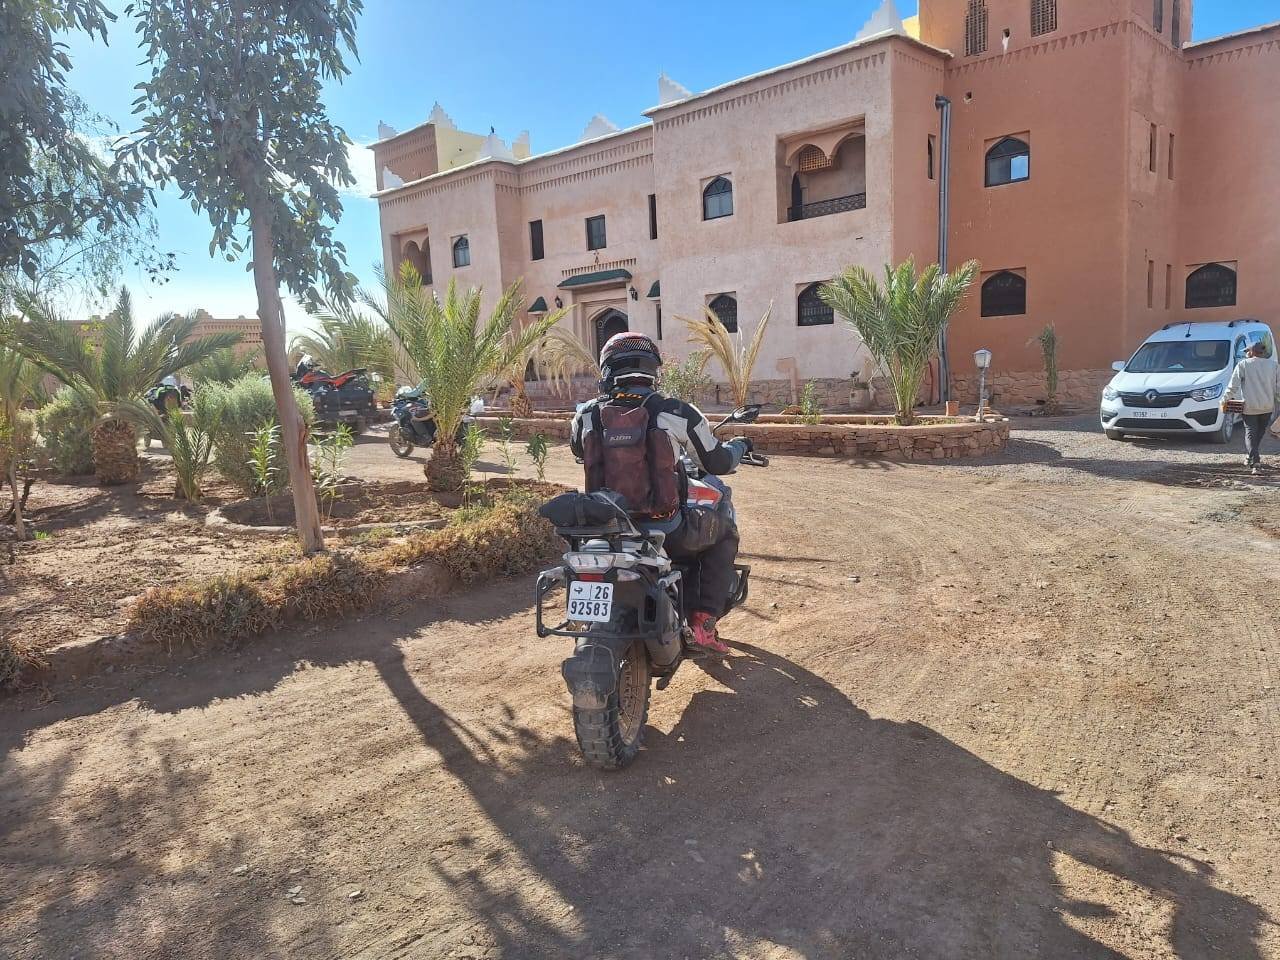 GUESTHOUSE IN OUARZAZATE